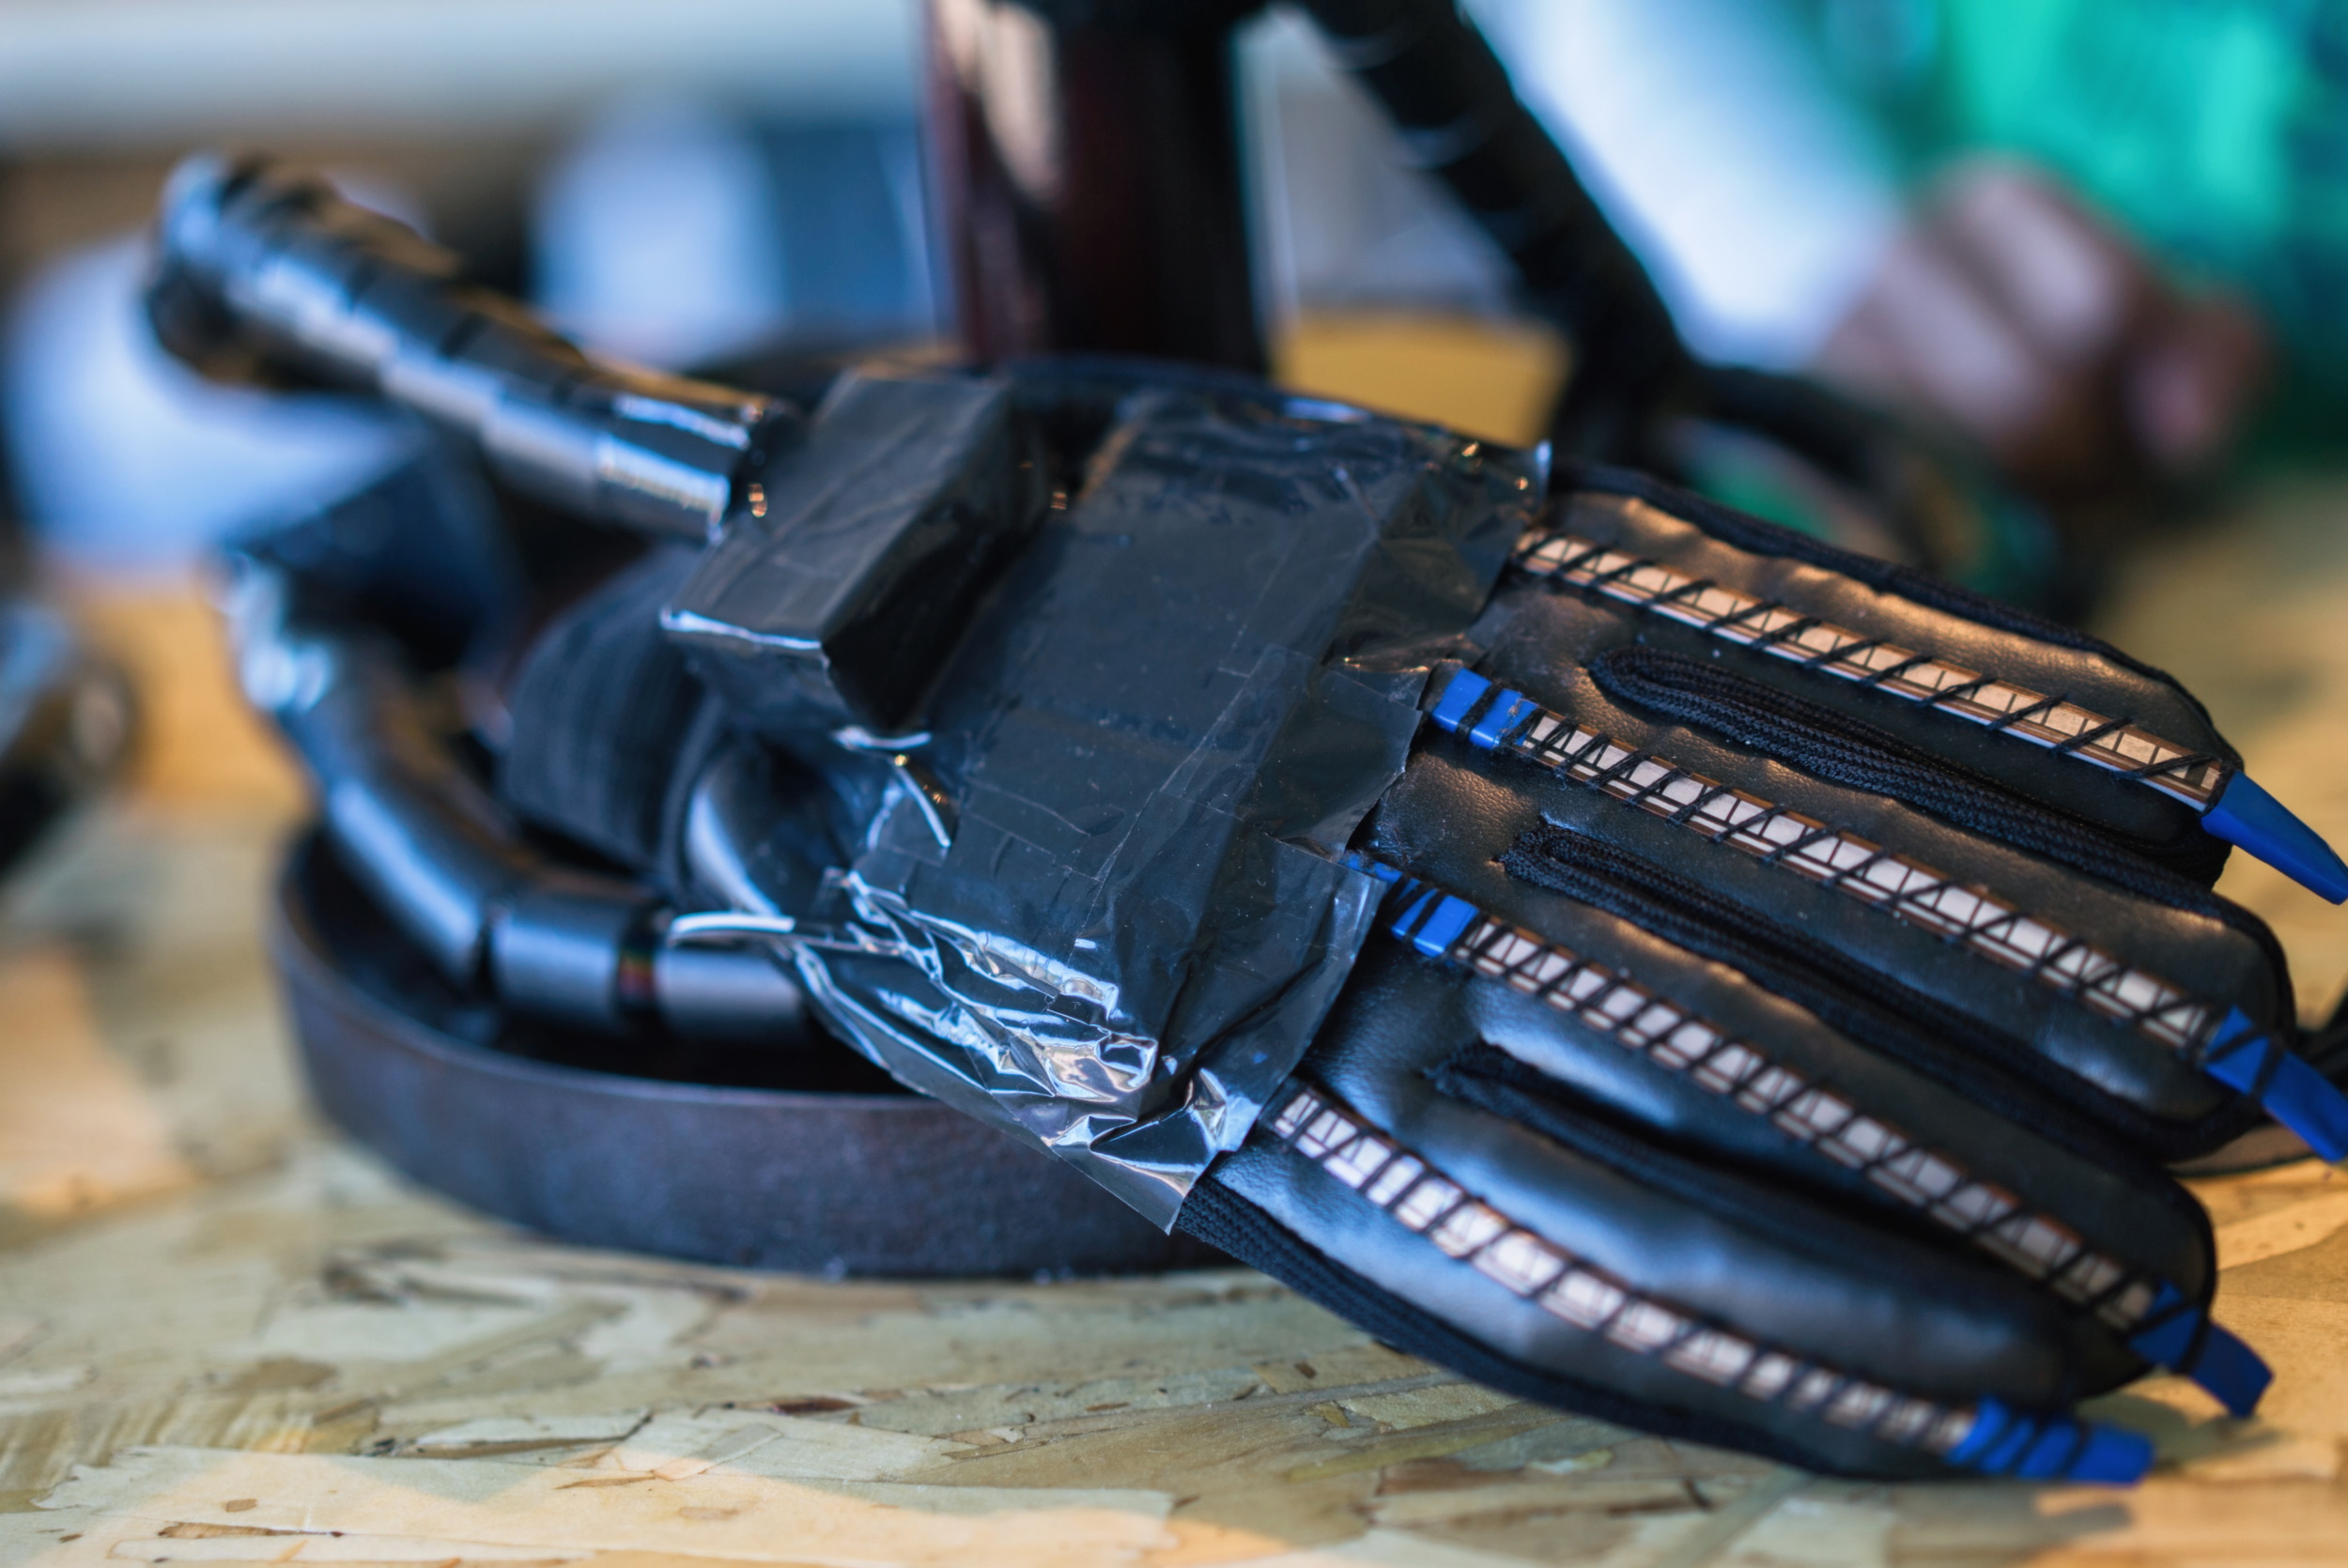 V Bionic's exoskeleton glove with its full covering.